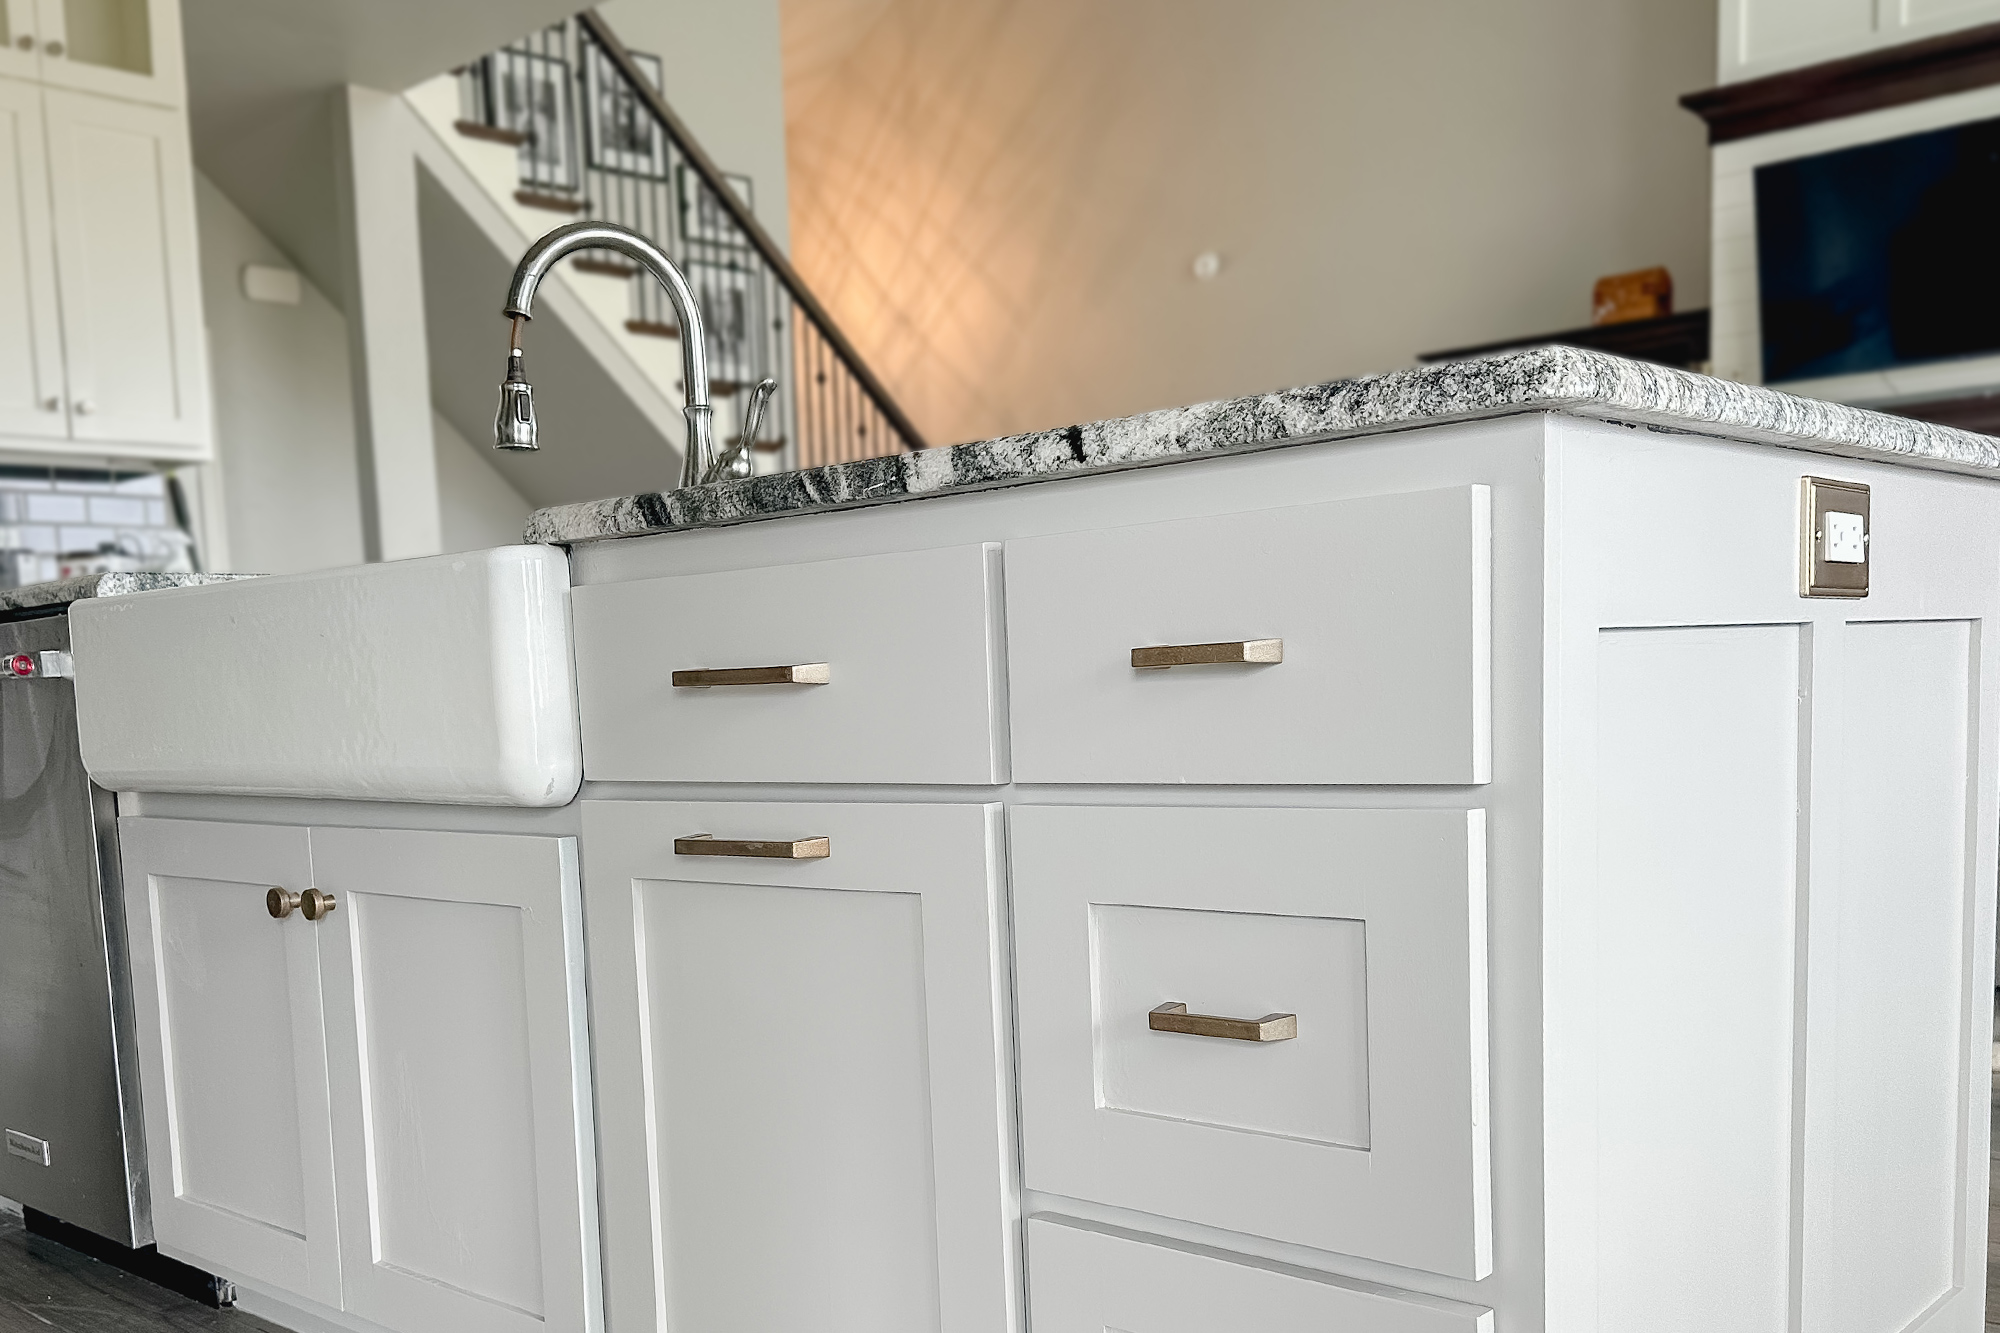 How to Easily Remove Paint from Cabinets: Step-by-Step Guide